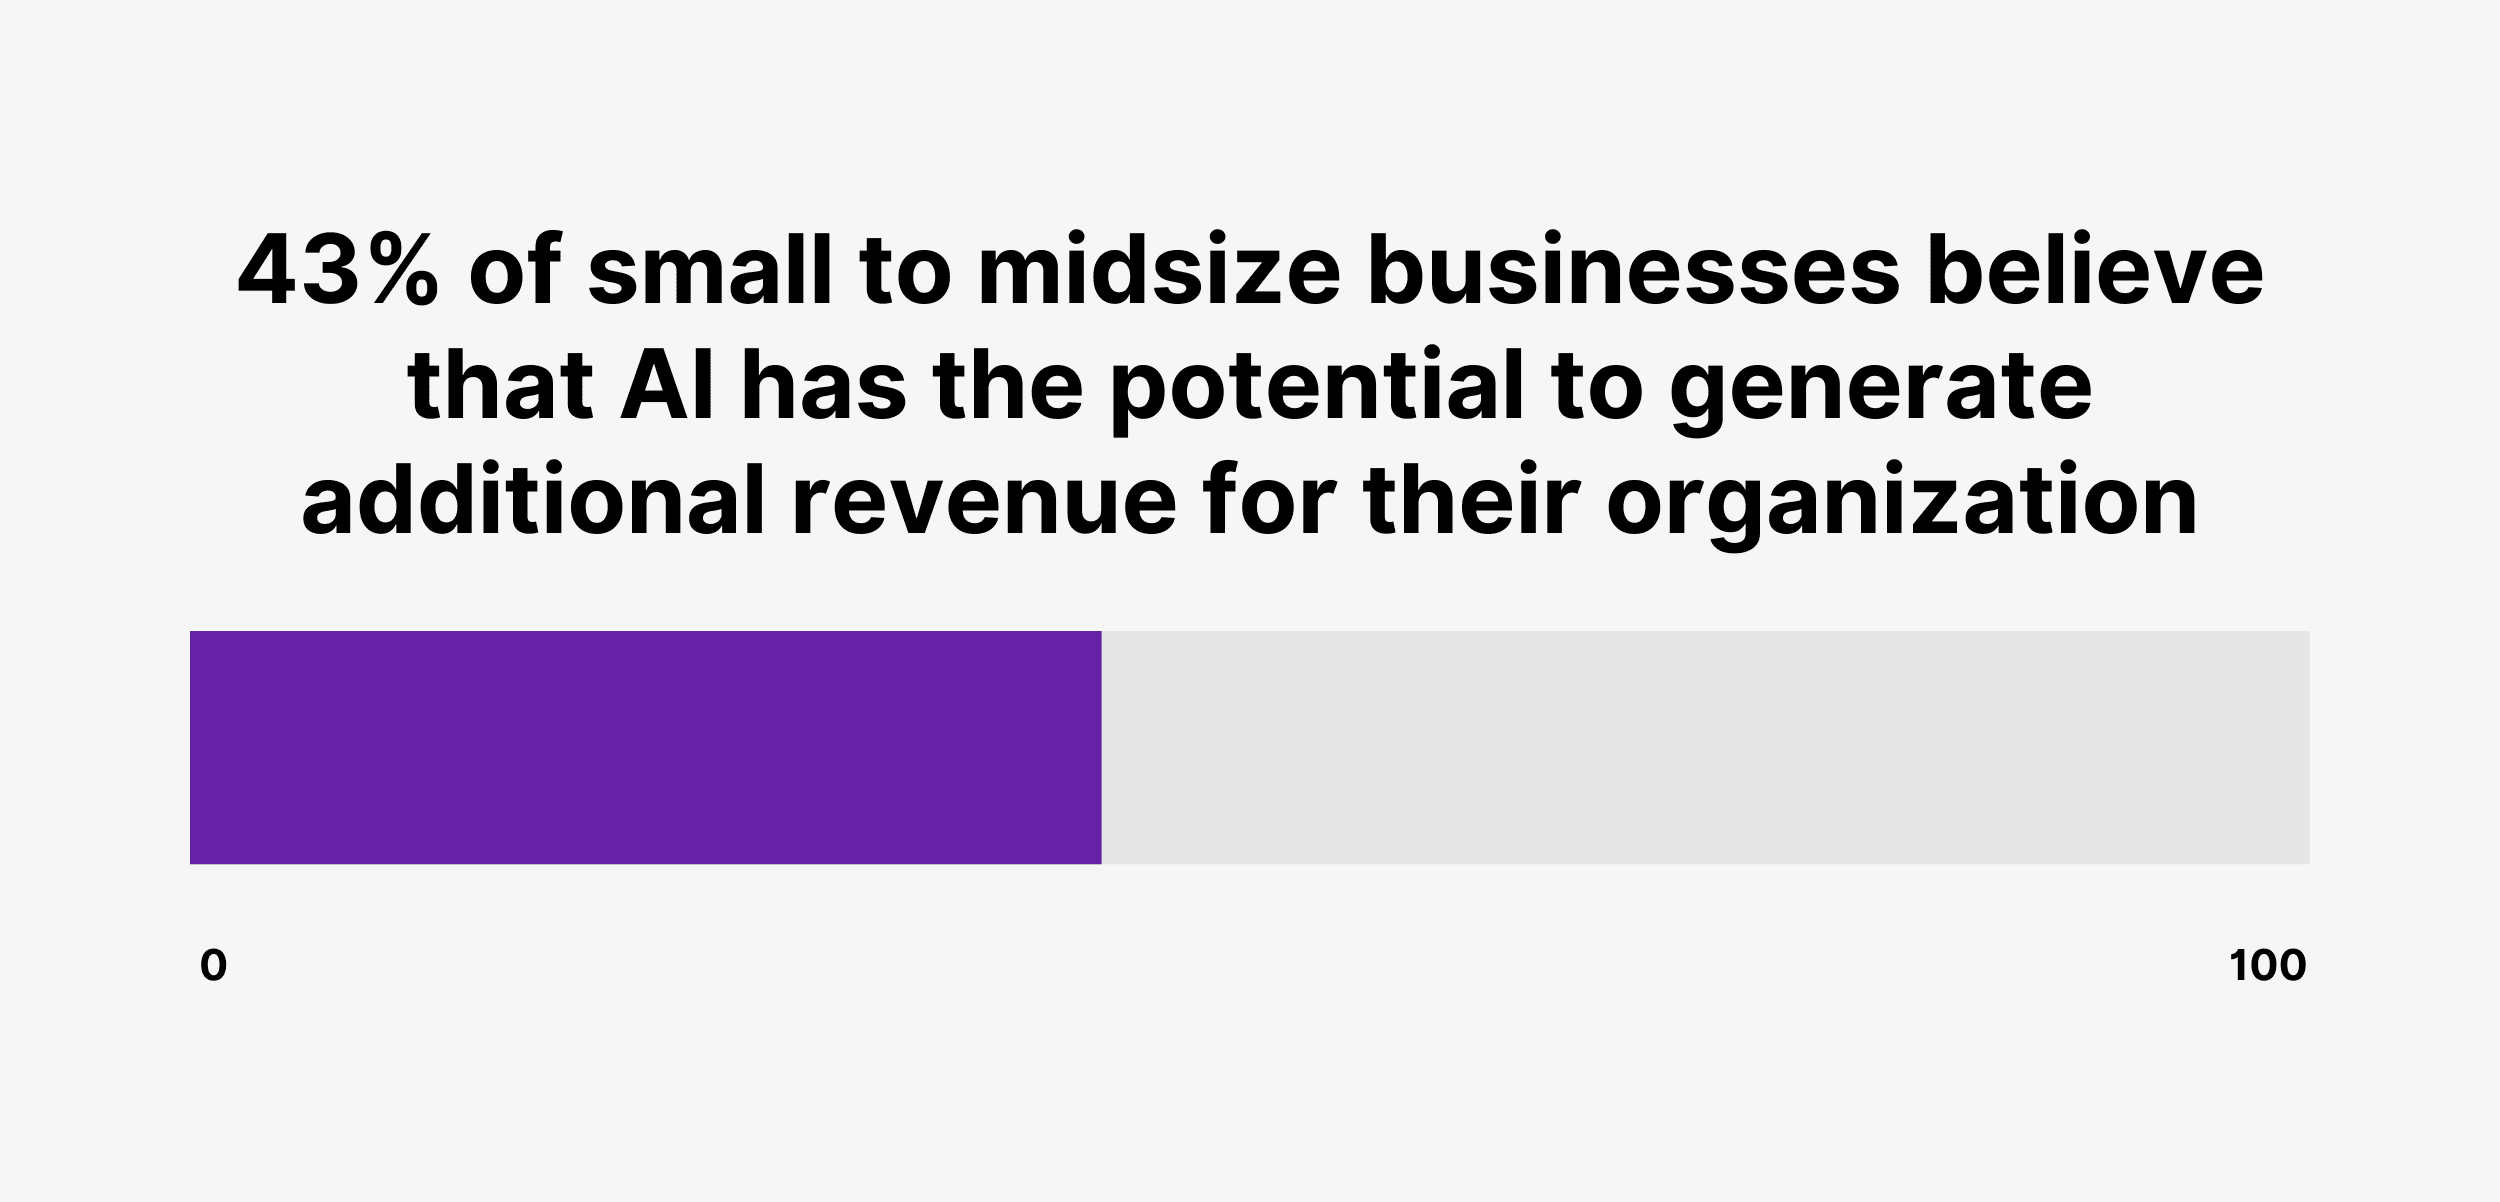 43% of small to midsize businesses believe that AI has the potential to generate additional revenue for their organization